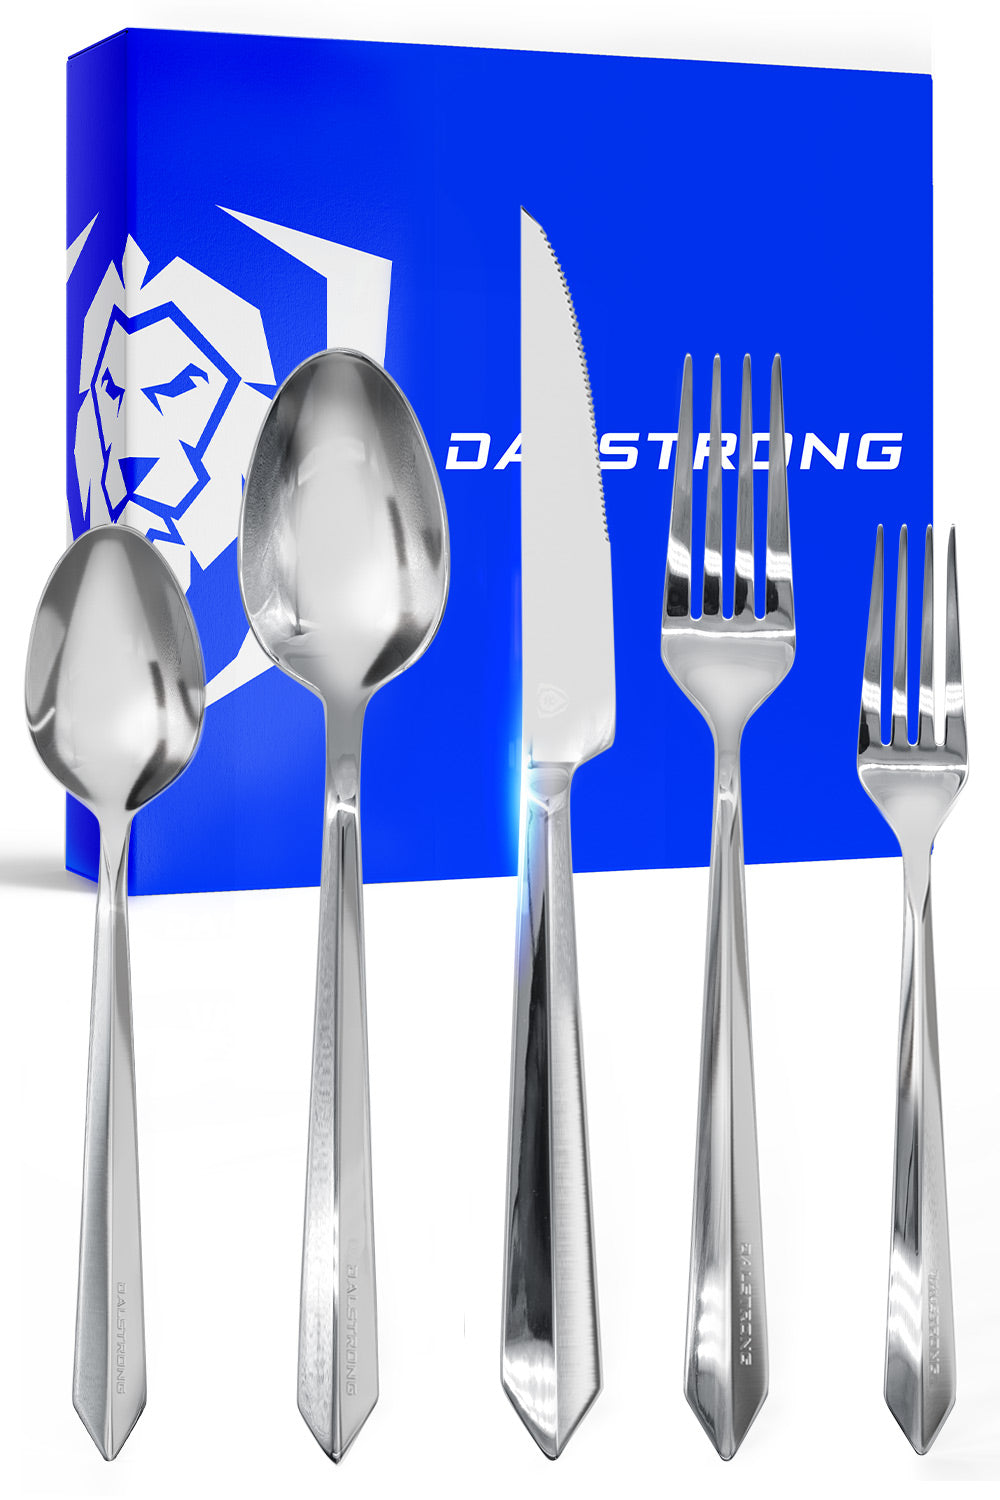 20-Piece Flatware Cutlery Set | Silver Stainless Steel | Service for 4 | Dalstrong